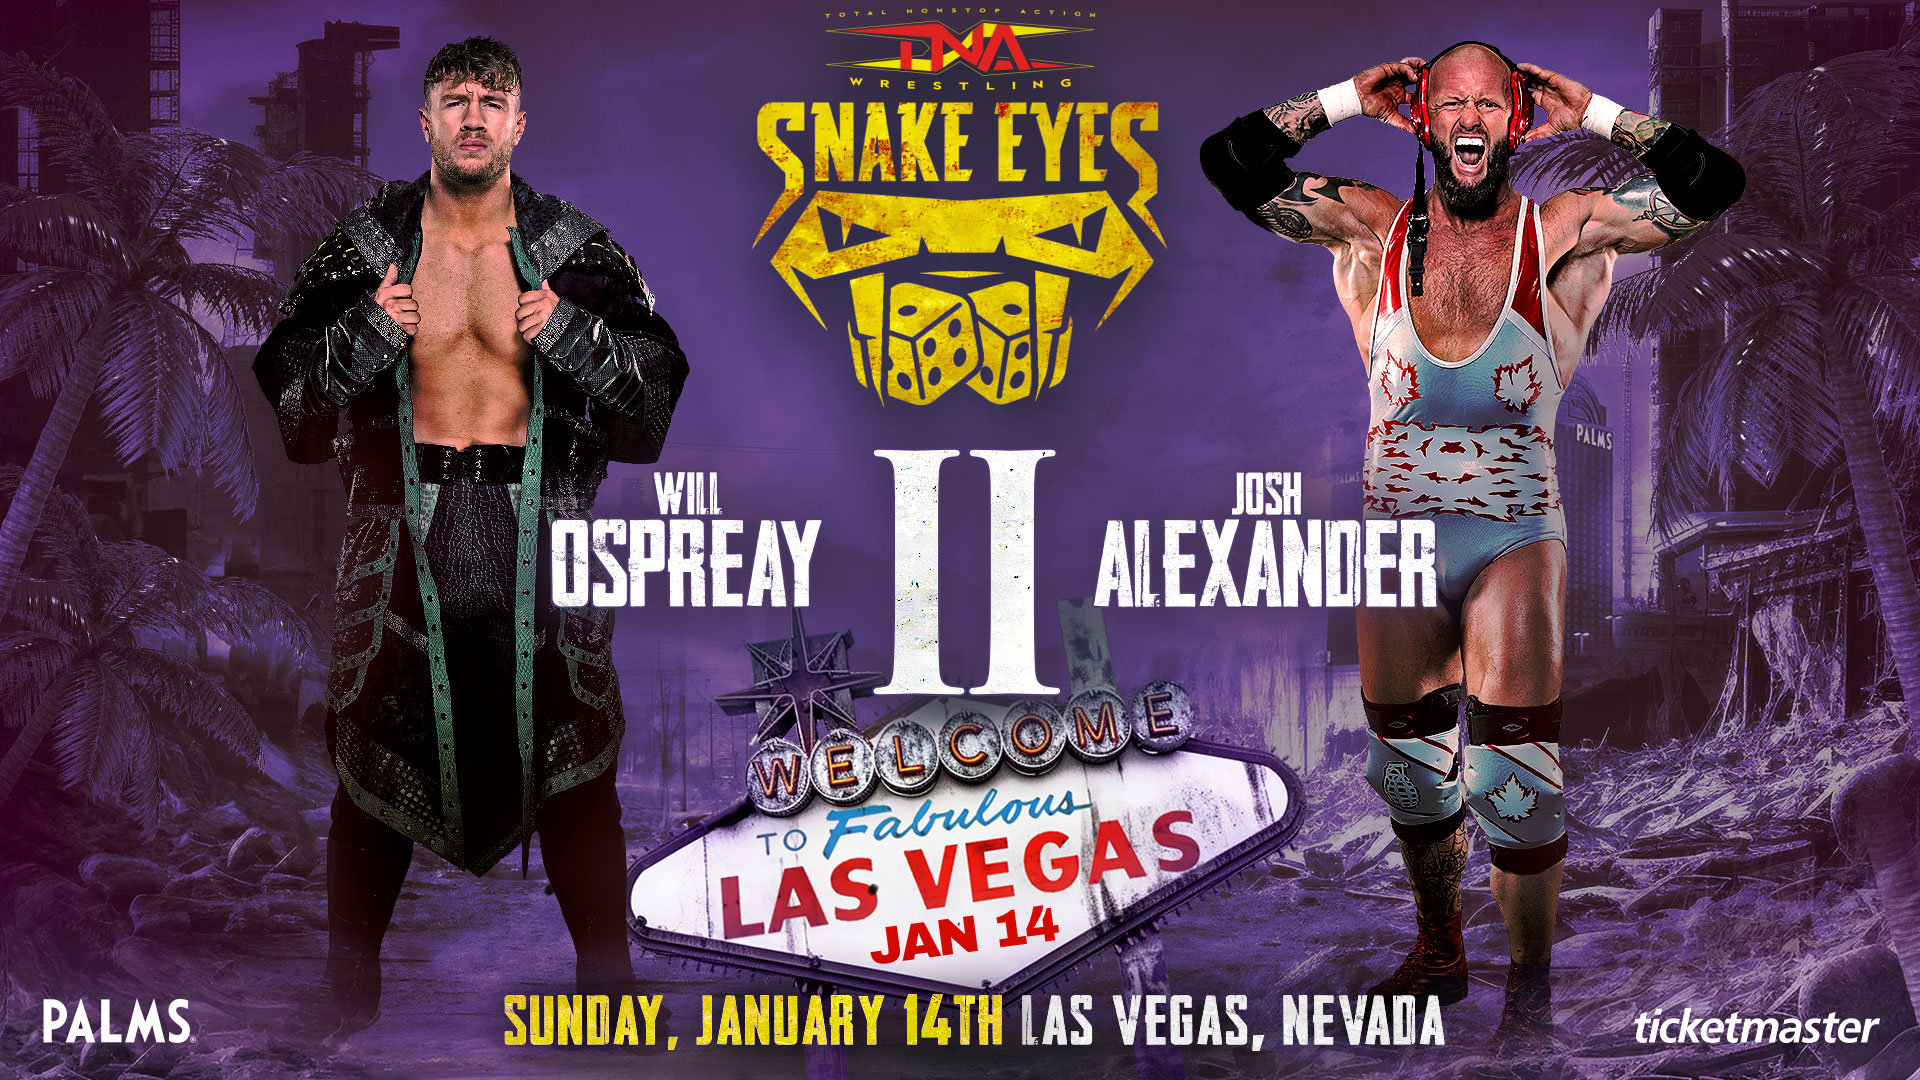 Josh Alexander Looks to Even the Score With Will Ospreay in Epic Encounter at TNA Snake Eyes – TNA Wrestling